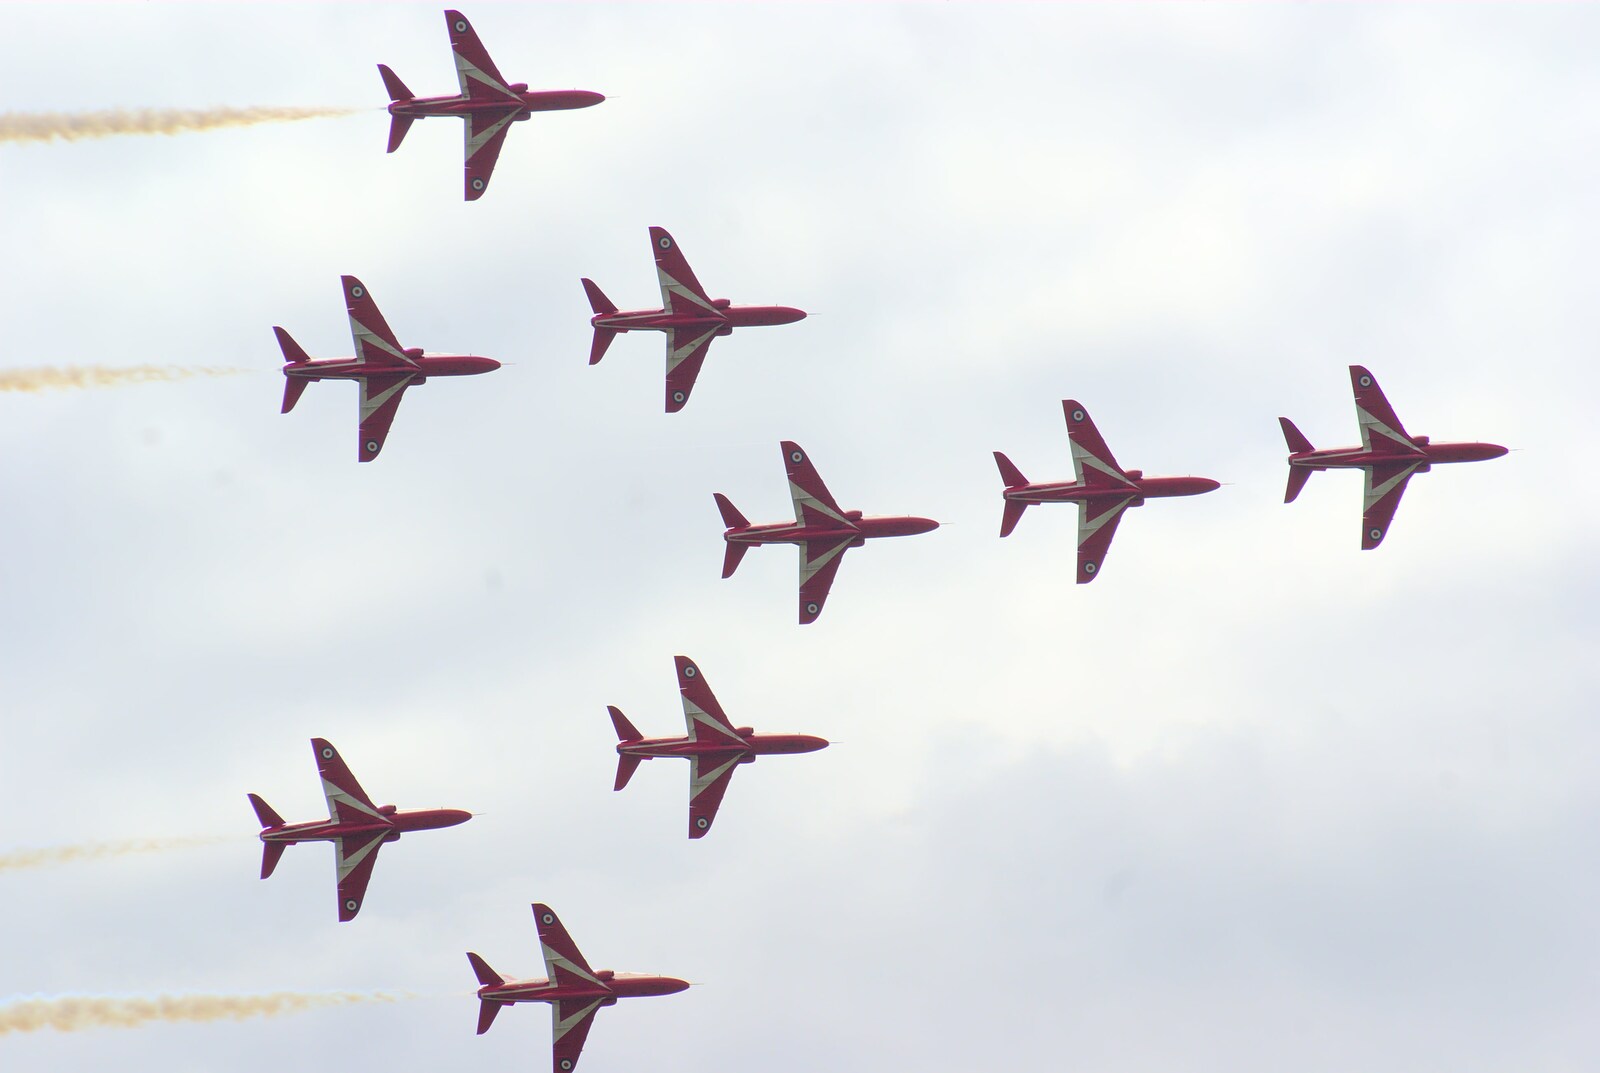 The Red Arrows in Concorde formation from The Eye Show and the Red Arrows, Palgrave, Suffolk - 31st August 2009